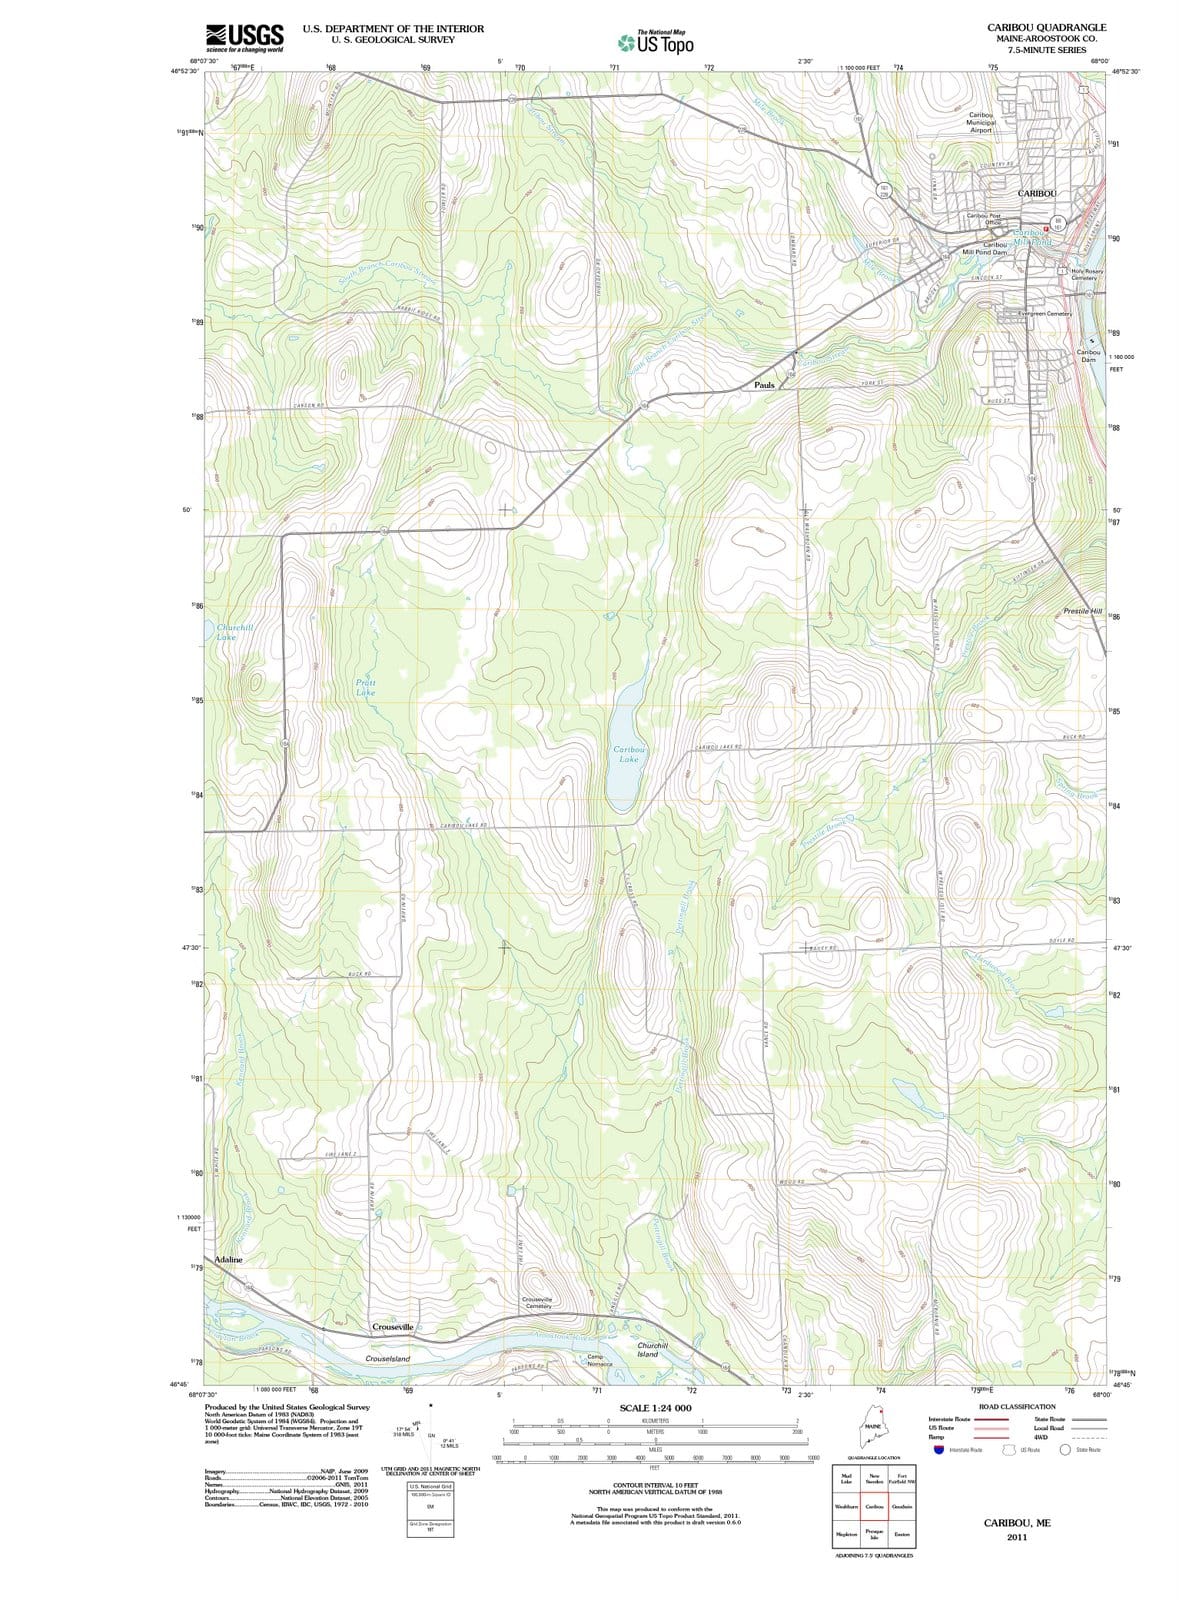 2011 Caribou, ME - Maine - USGS Topographic Map